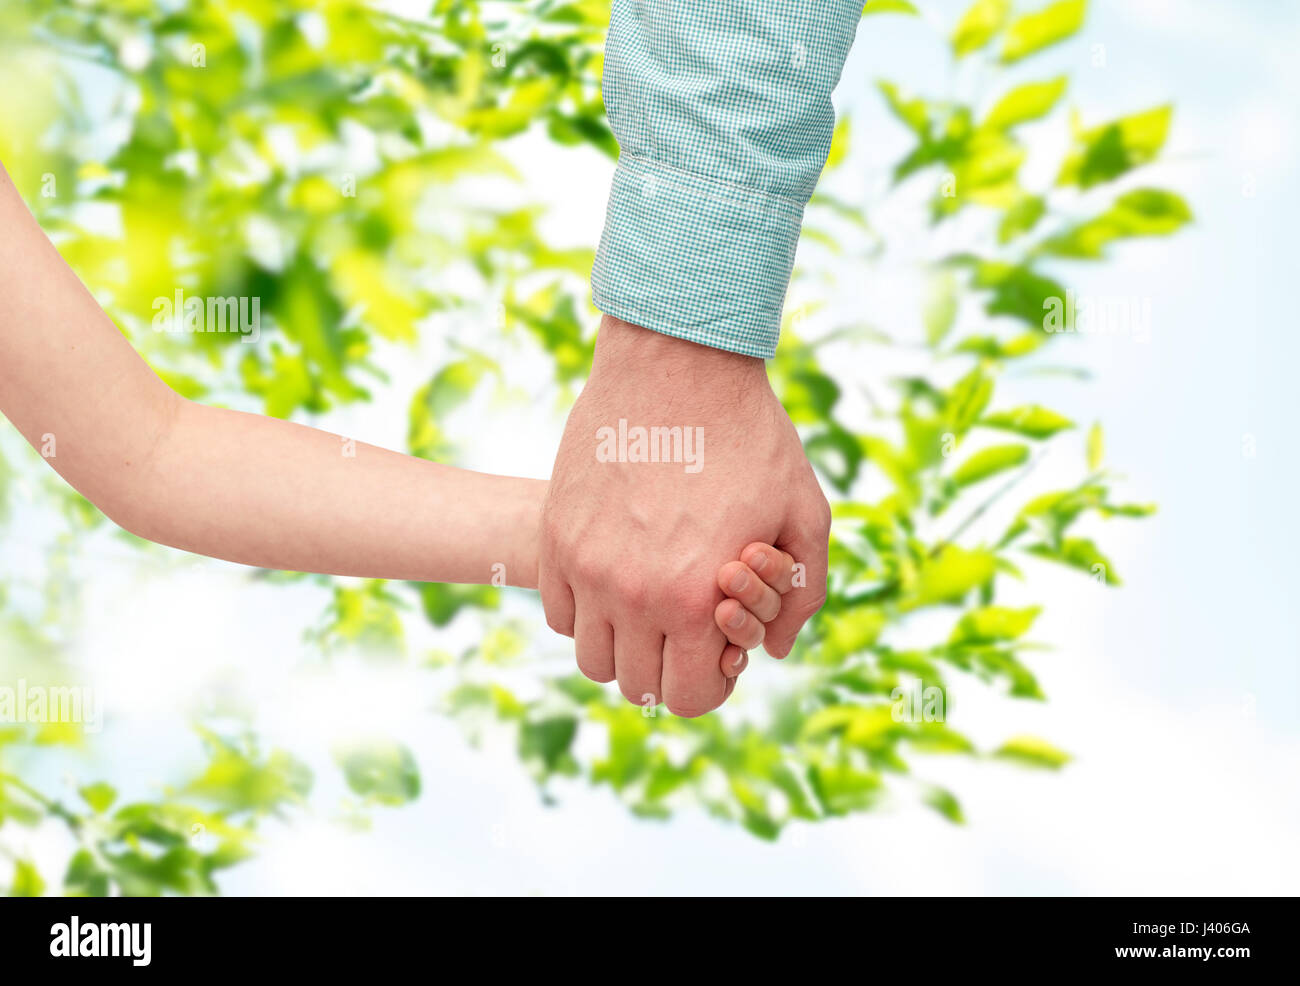 father and child holding hands over green leaves Stock Photo